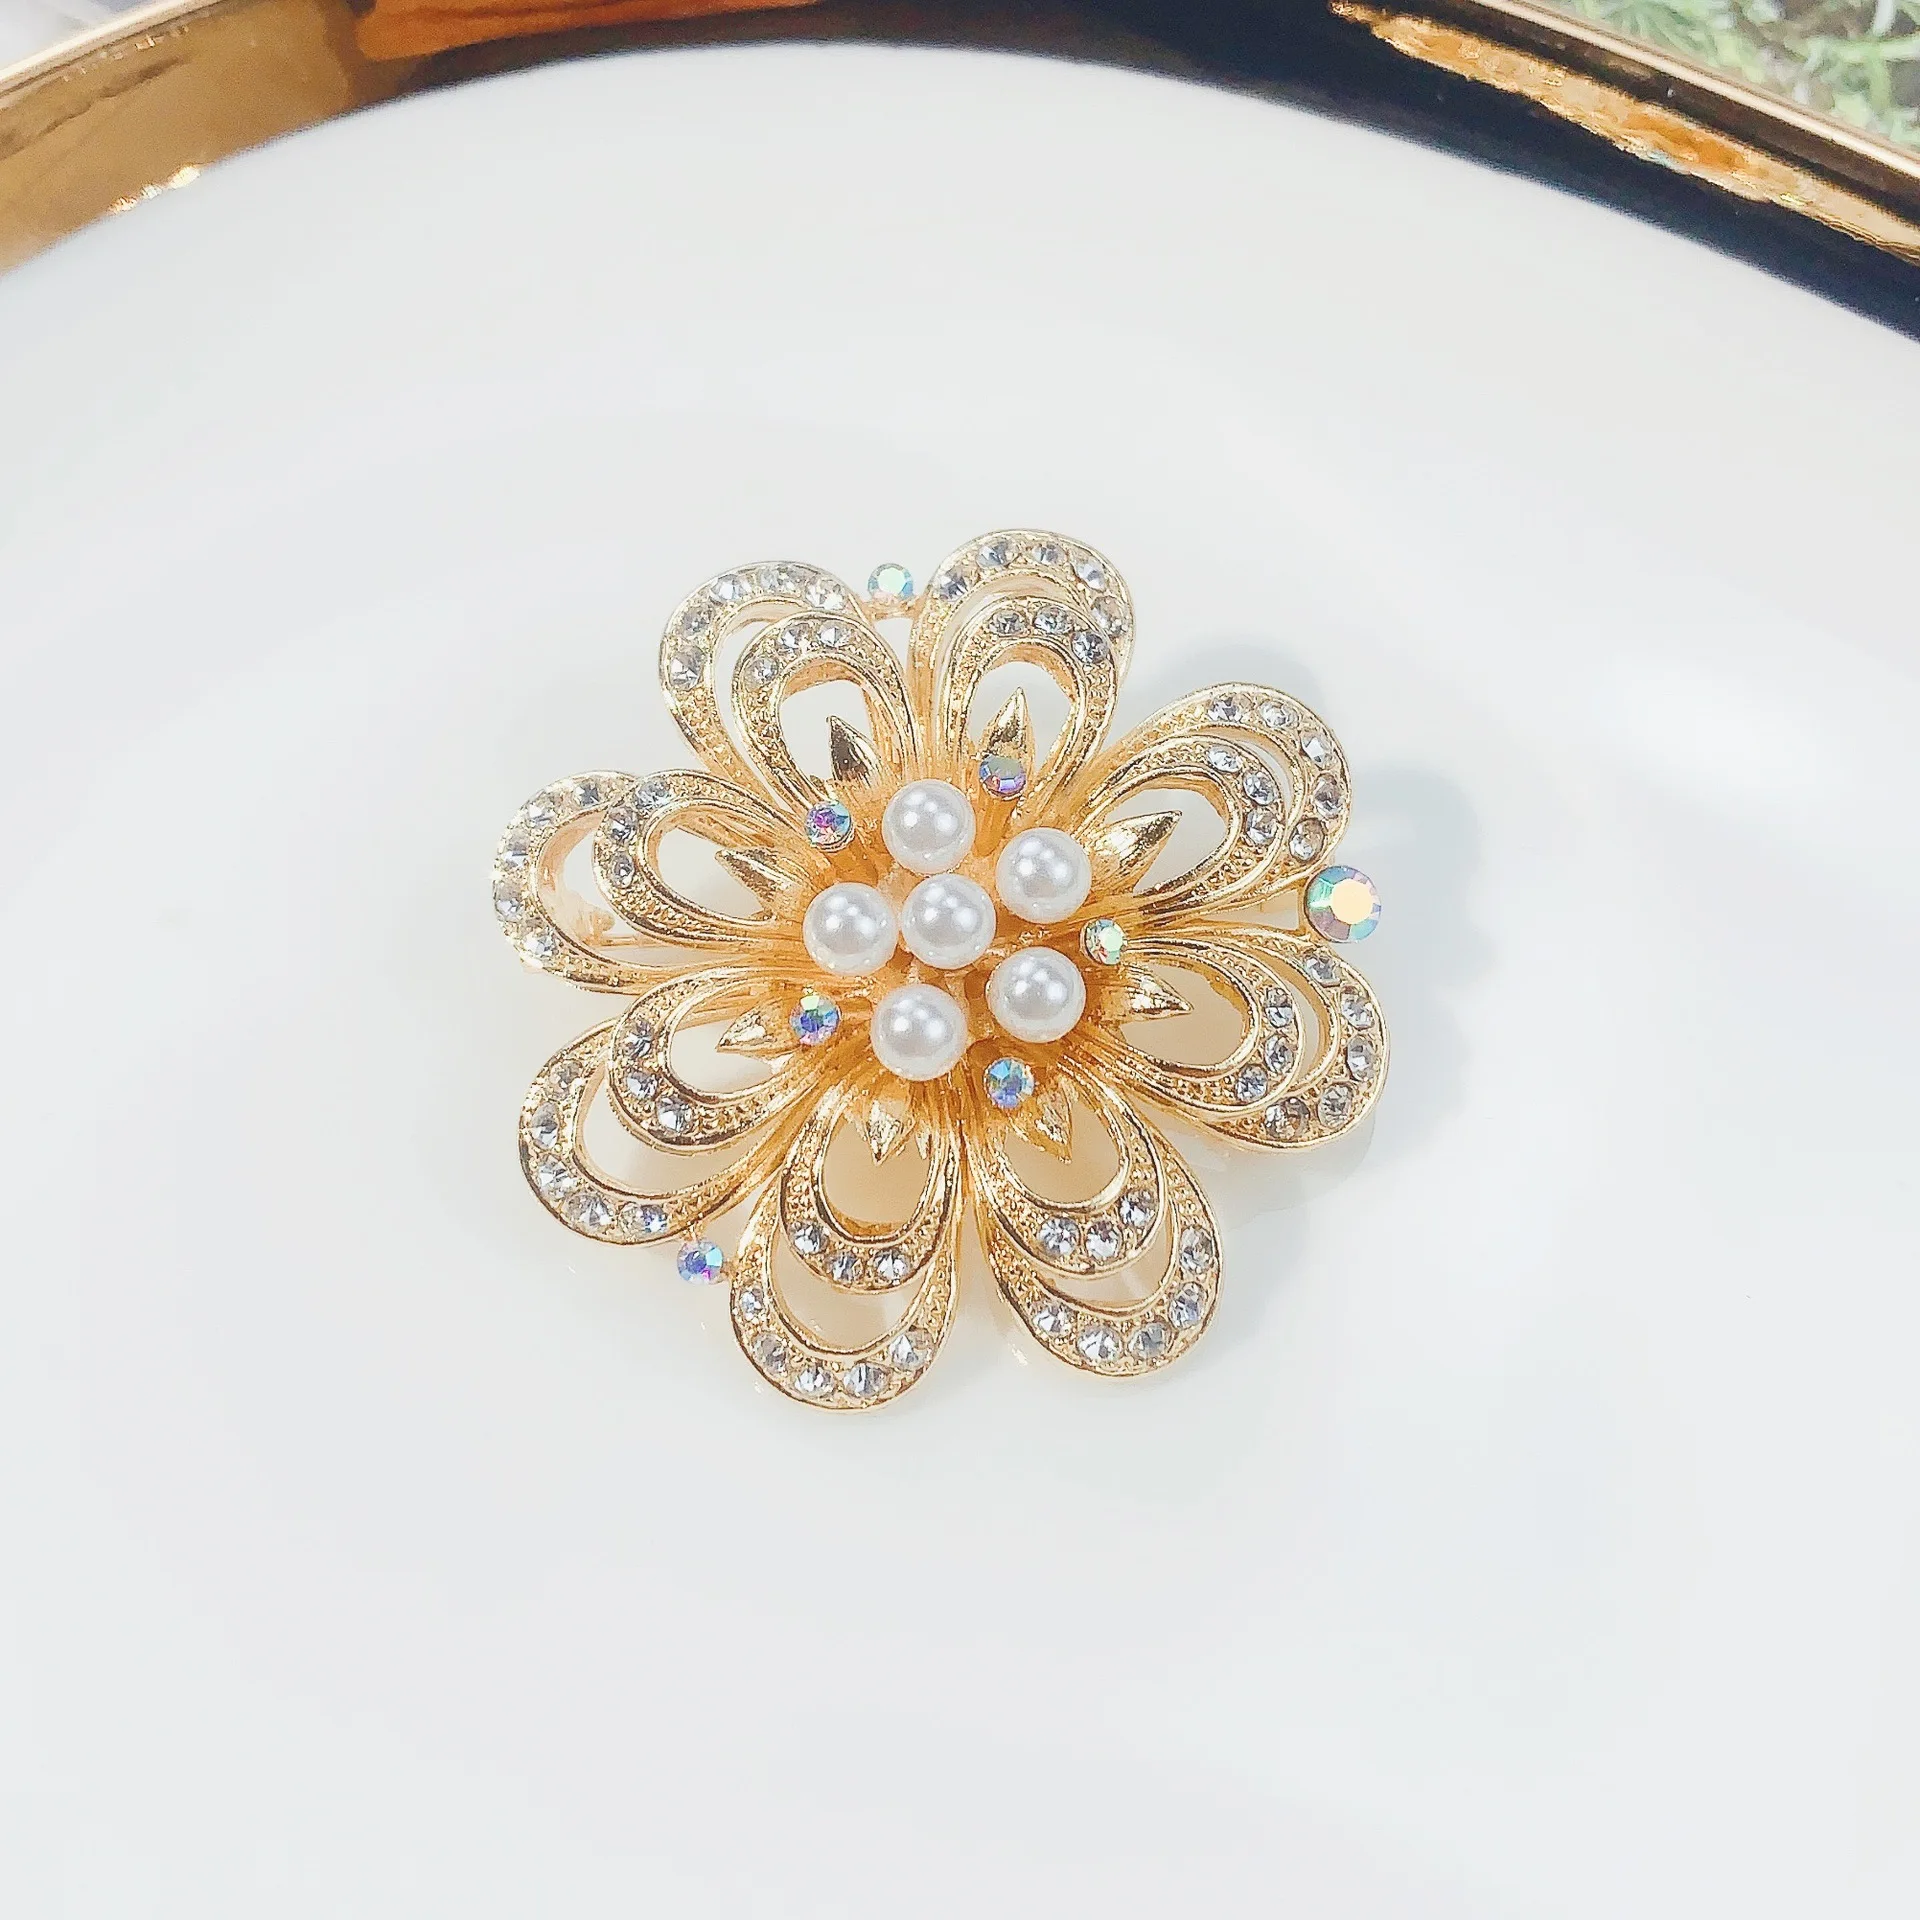 
Fashion Ladies Jewelry Brooch Custom Flower Shape Jewelry Gold Brooch with Pearl Decoration in Stock 